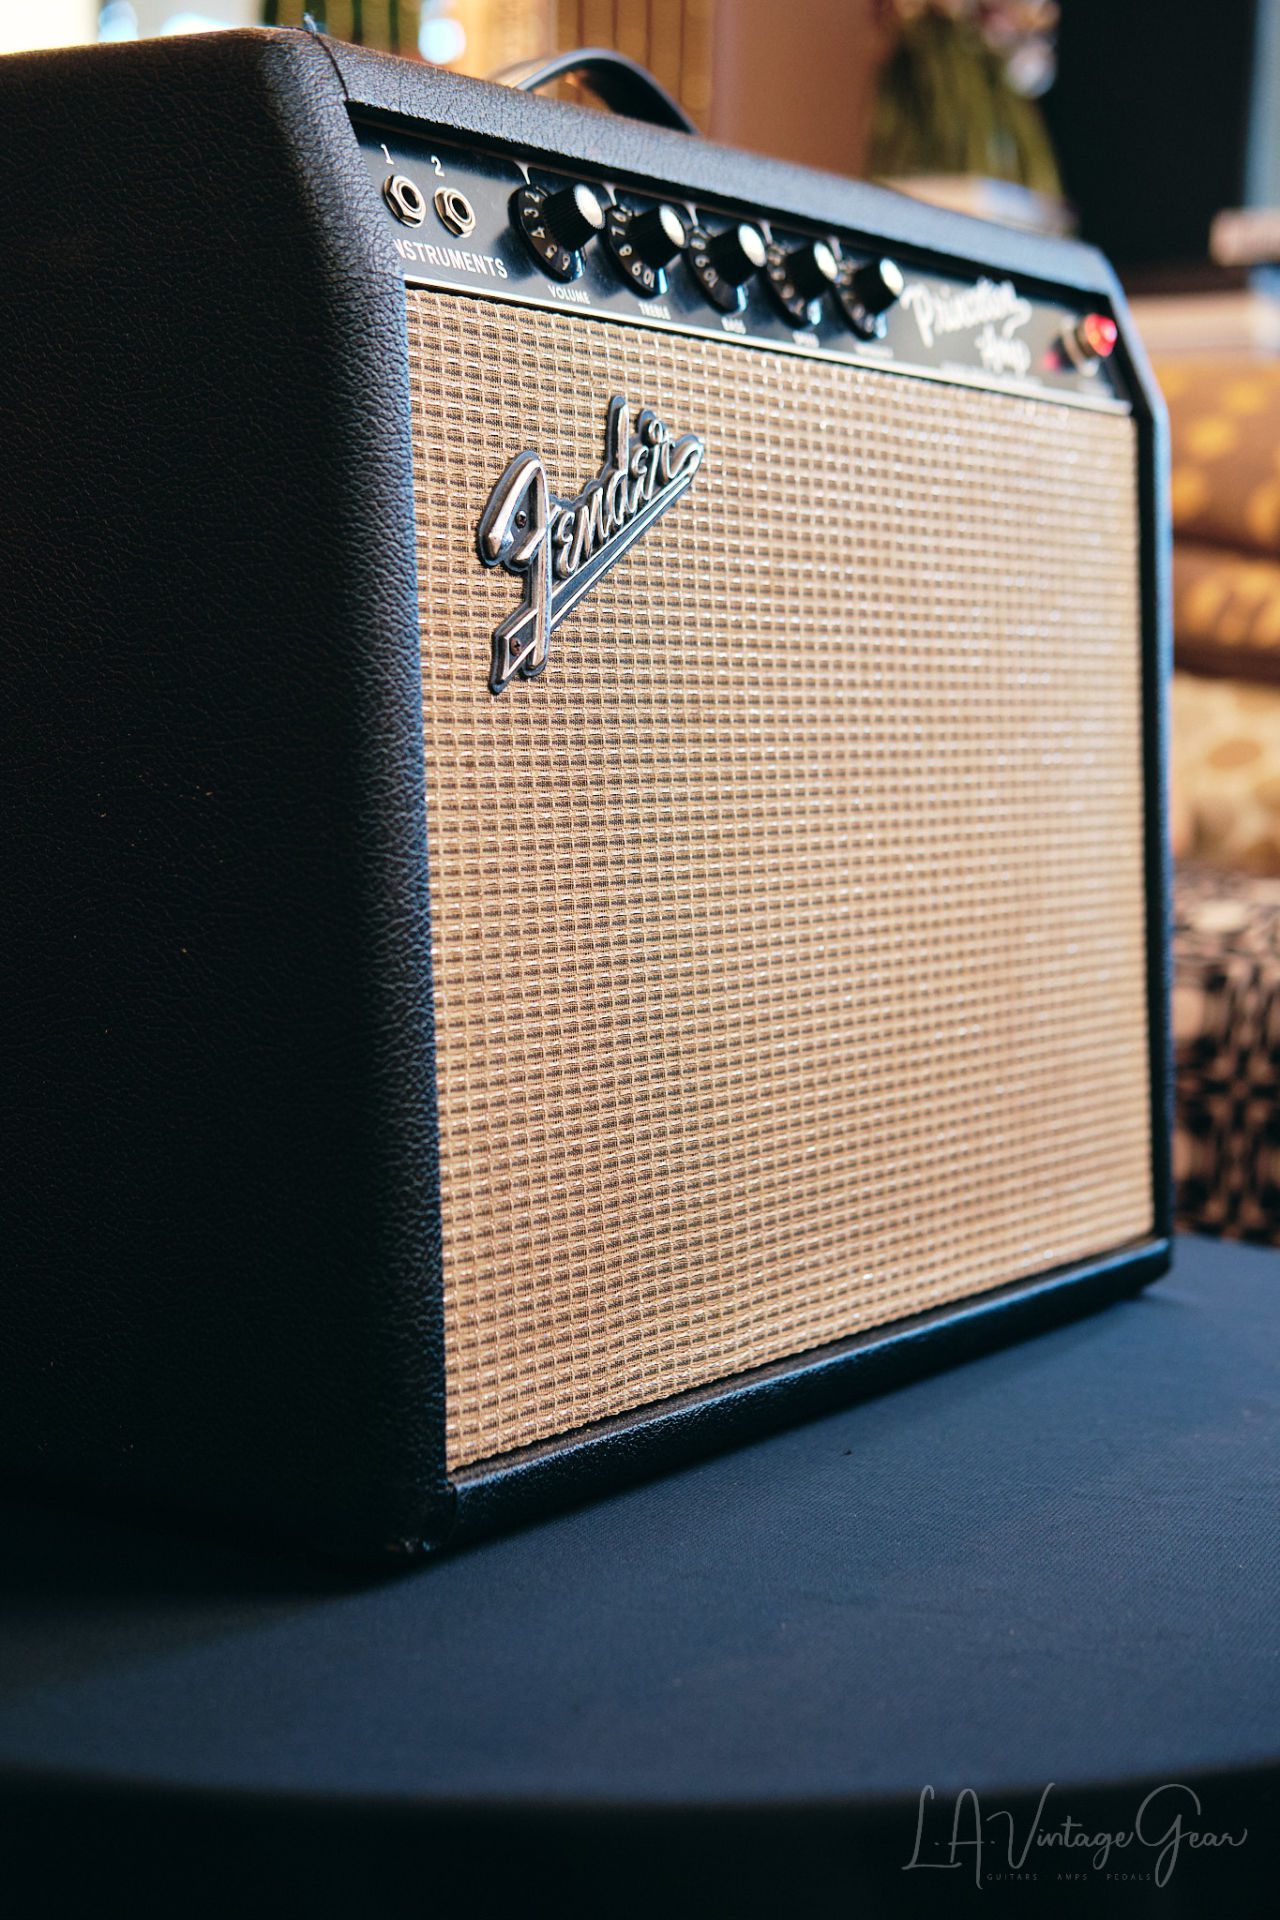 Fender 1965 Princeton Amp - Great low powered amp for pedals!